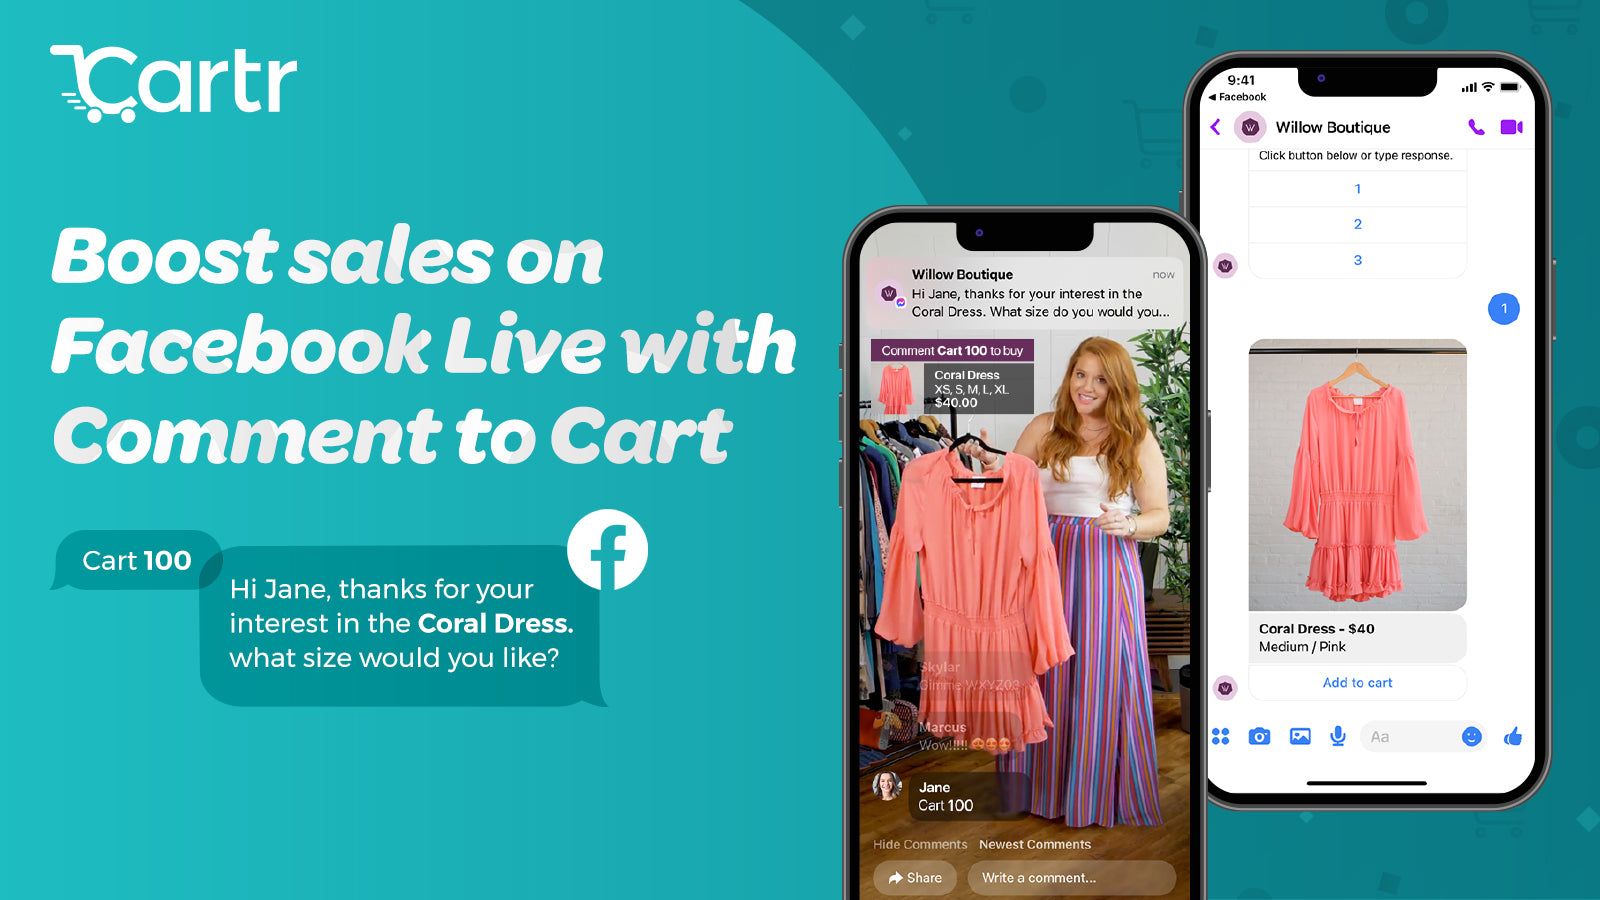 Boost sales on Facebook Live with Comment to Cart